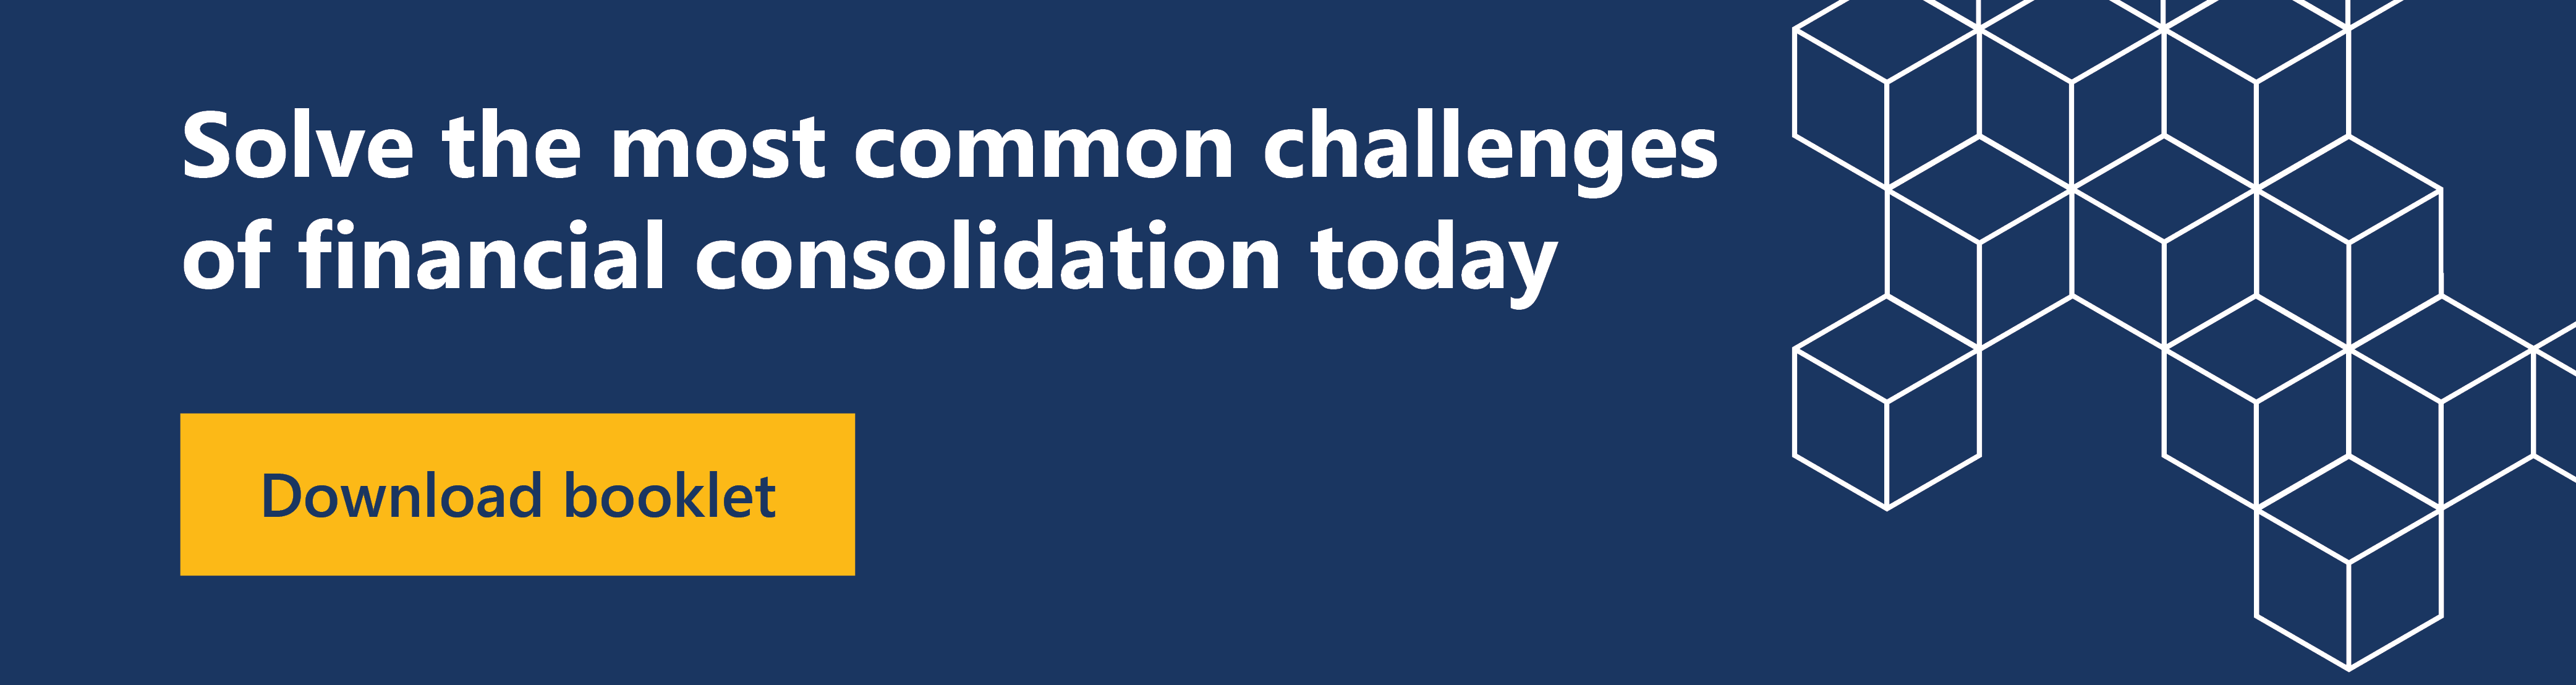 common challenges of financial consolidation can be solved with Multi-Entity Management